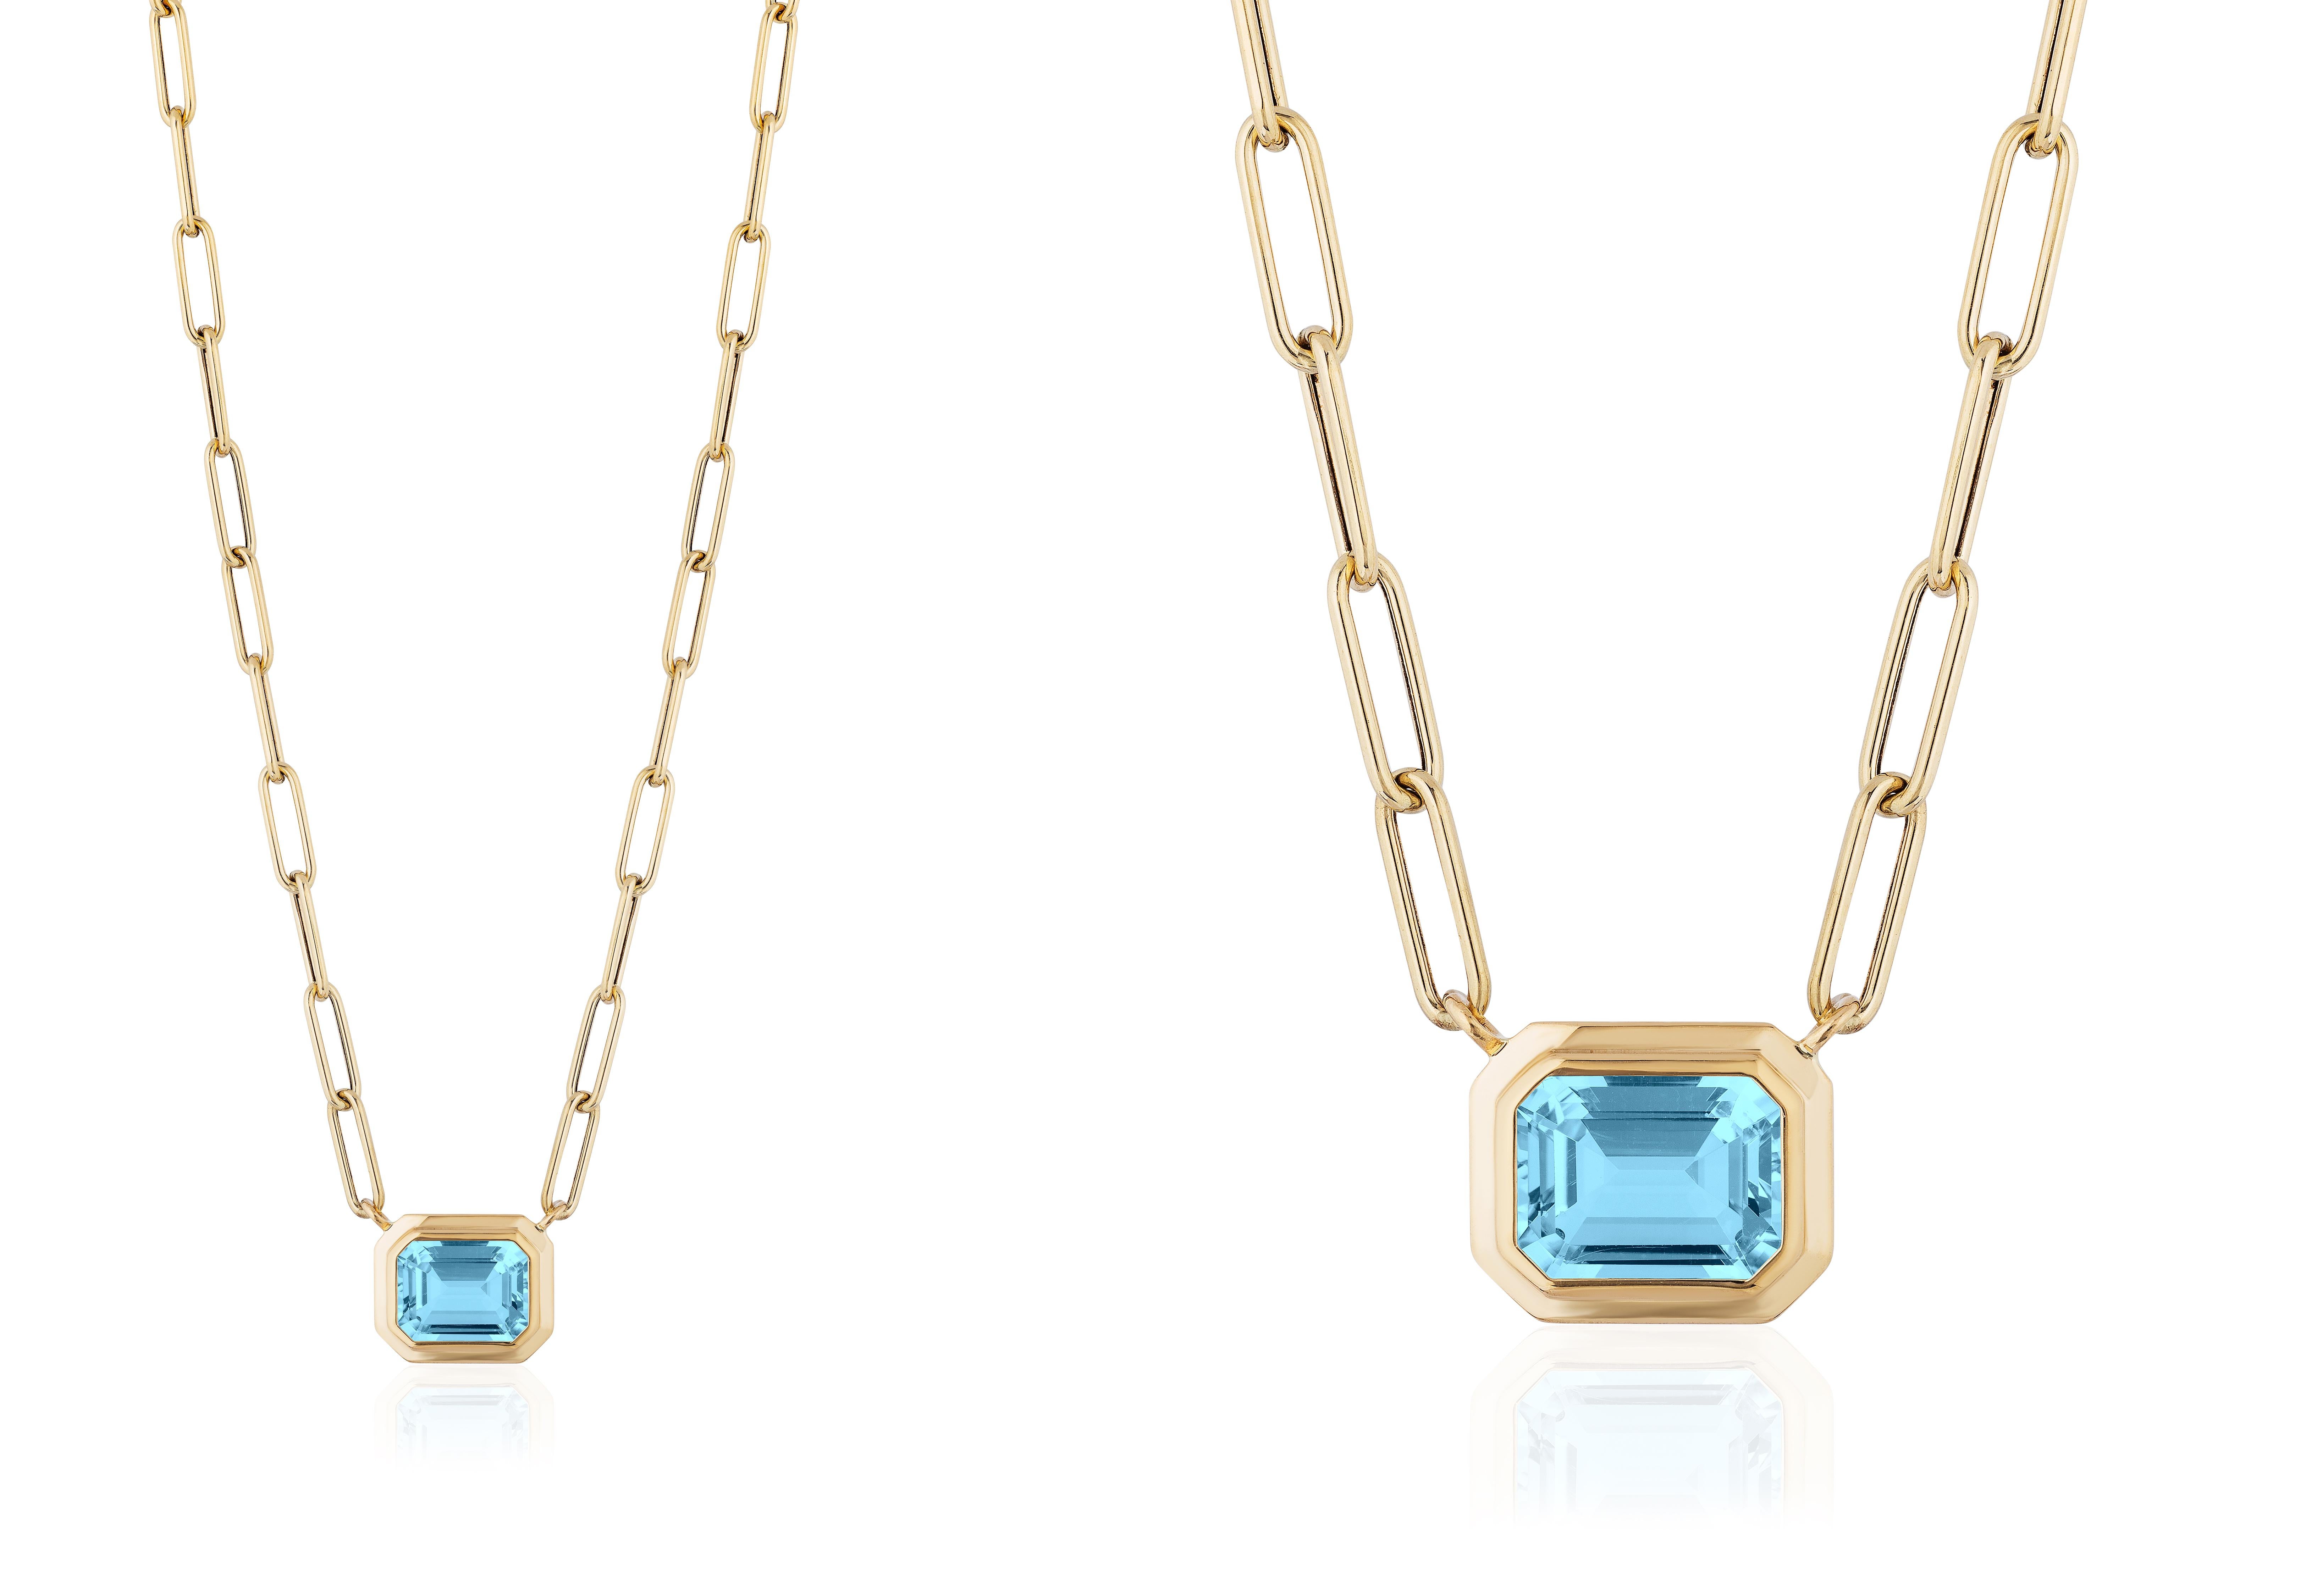 This beautiful East-West Blue Topaz Emerald Cut Bezel Set Pendant in 18K Yellow Gold is from our ‘Manhattan’ Collection. Minimalist lines yet bold structures are what our Manhattan Collection is all about. Our pieces represent the famous skyline and